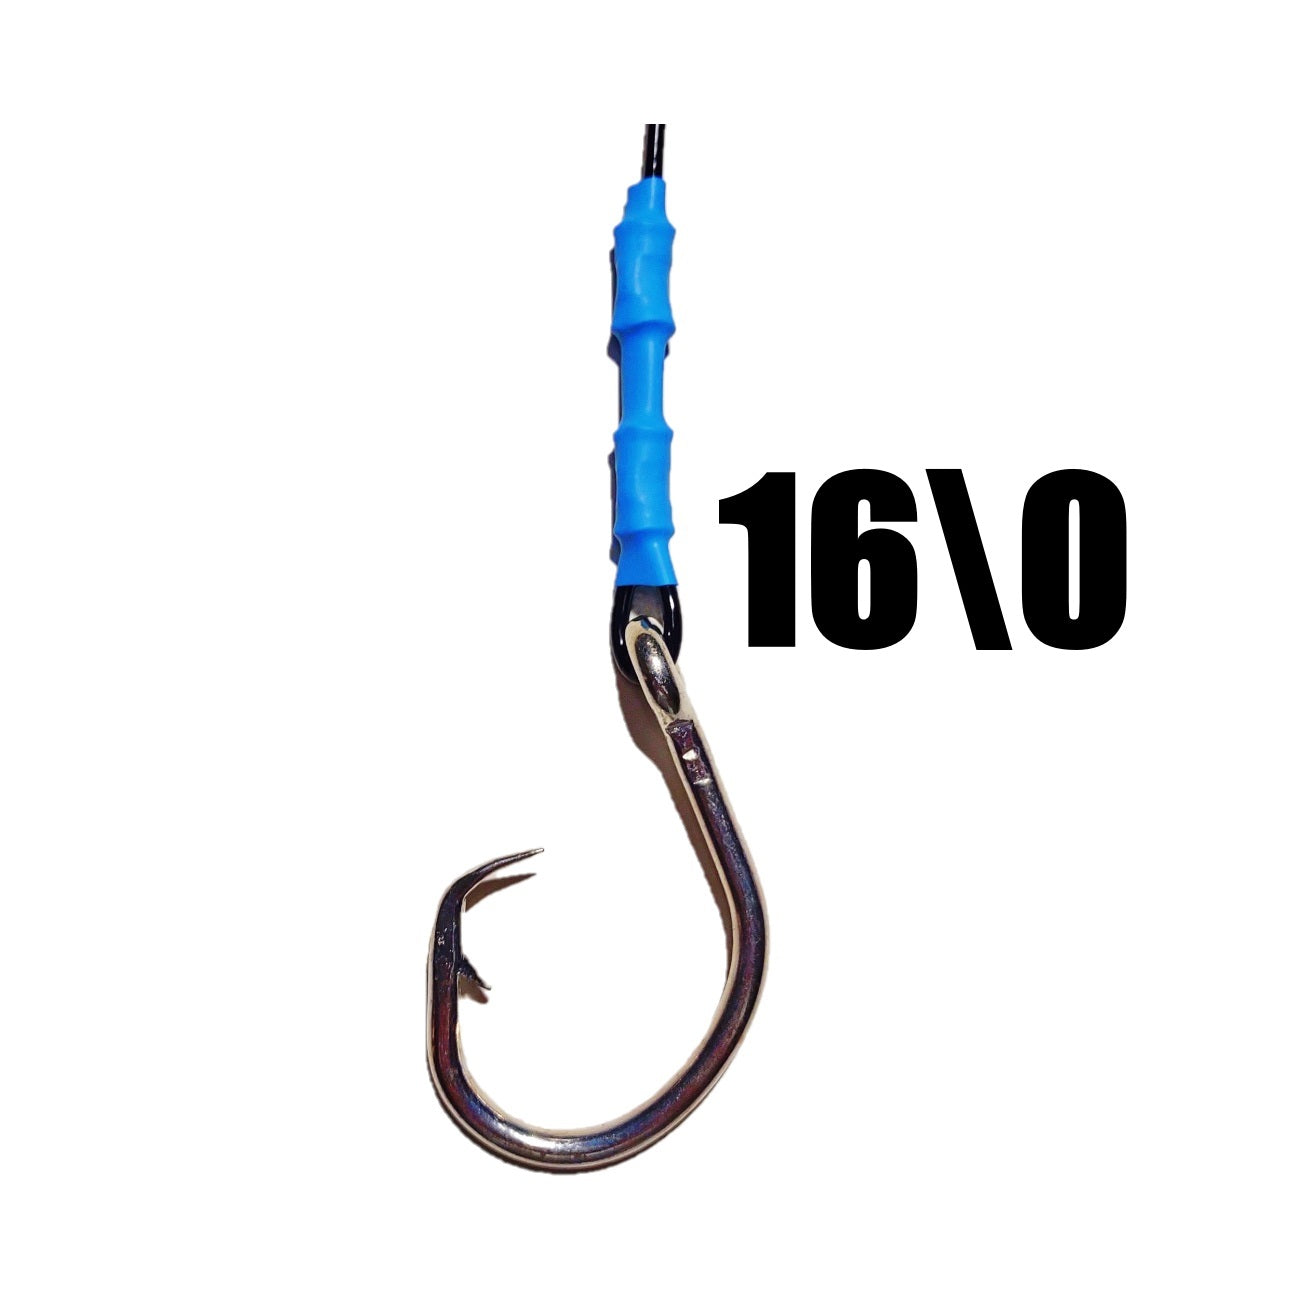 10 Foot - Cable Combo Shark Leader